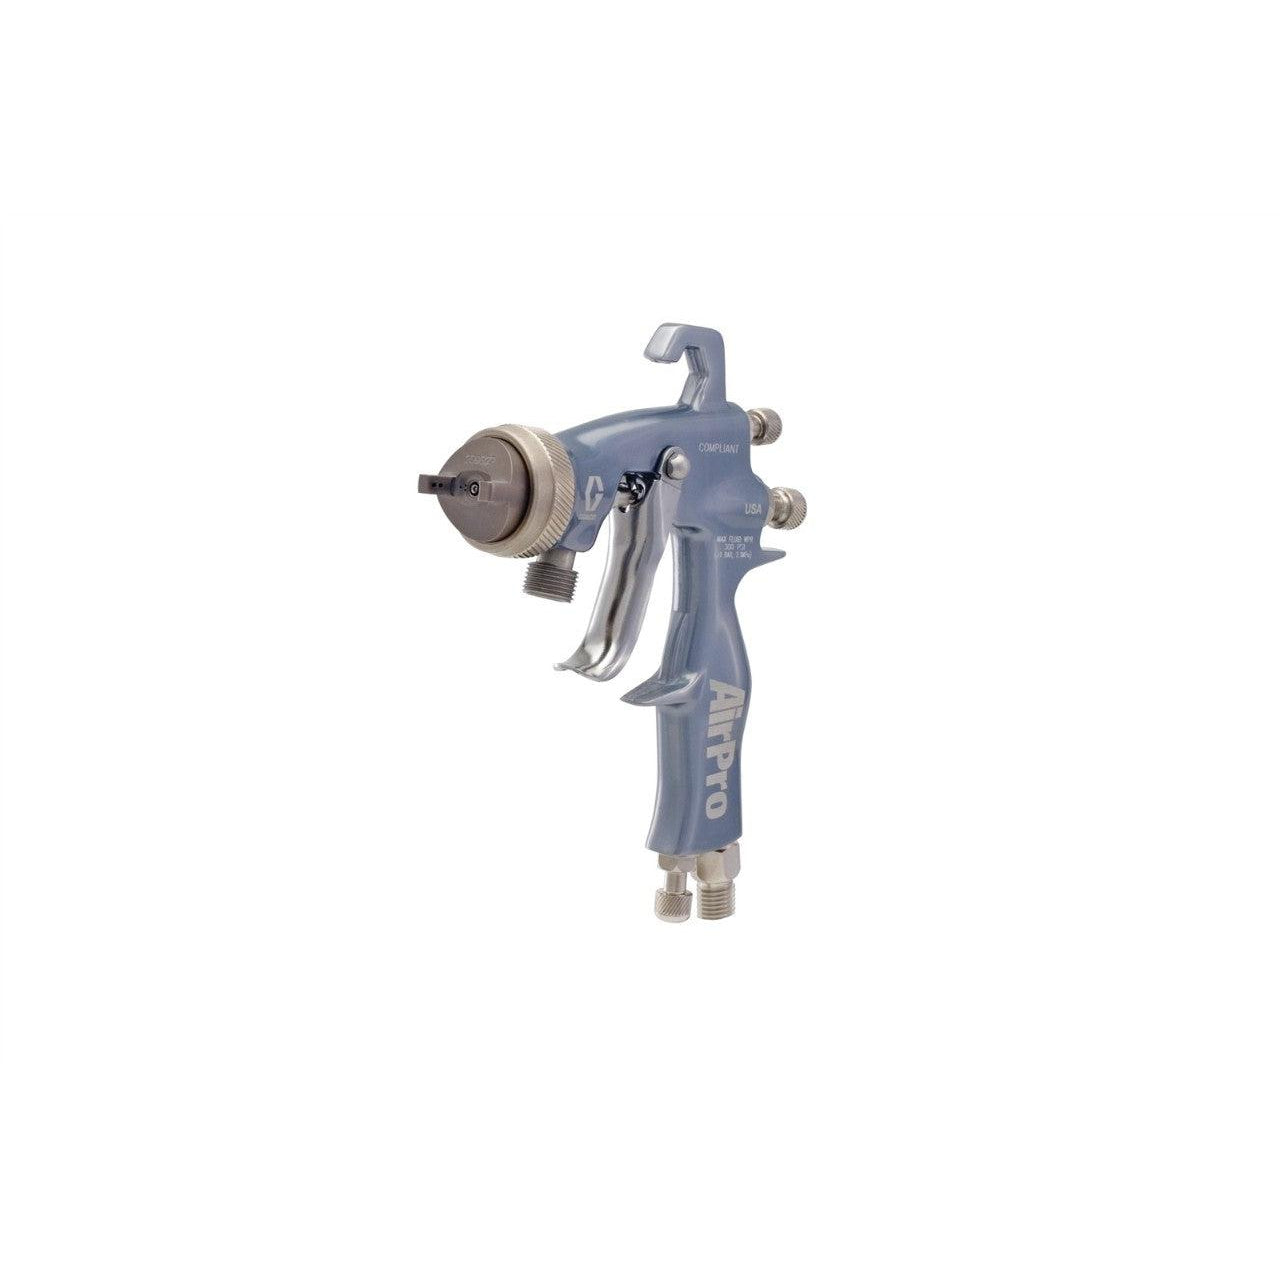 AirPro Air Spray Pressure Feed Gun, Compliant, 0.055 inch (1.4 mm) Nozzle, for Automotive Applications